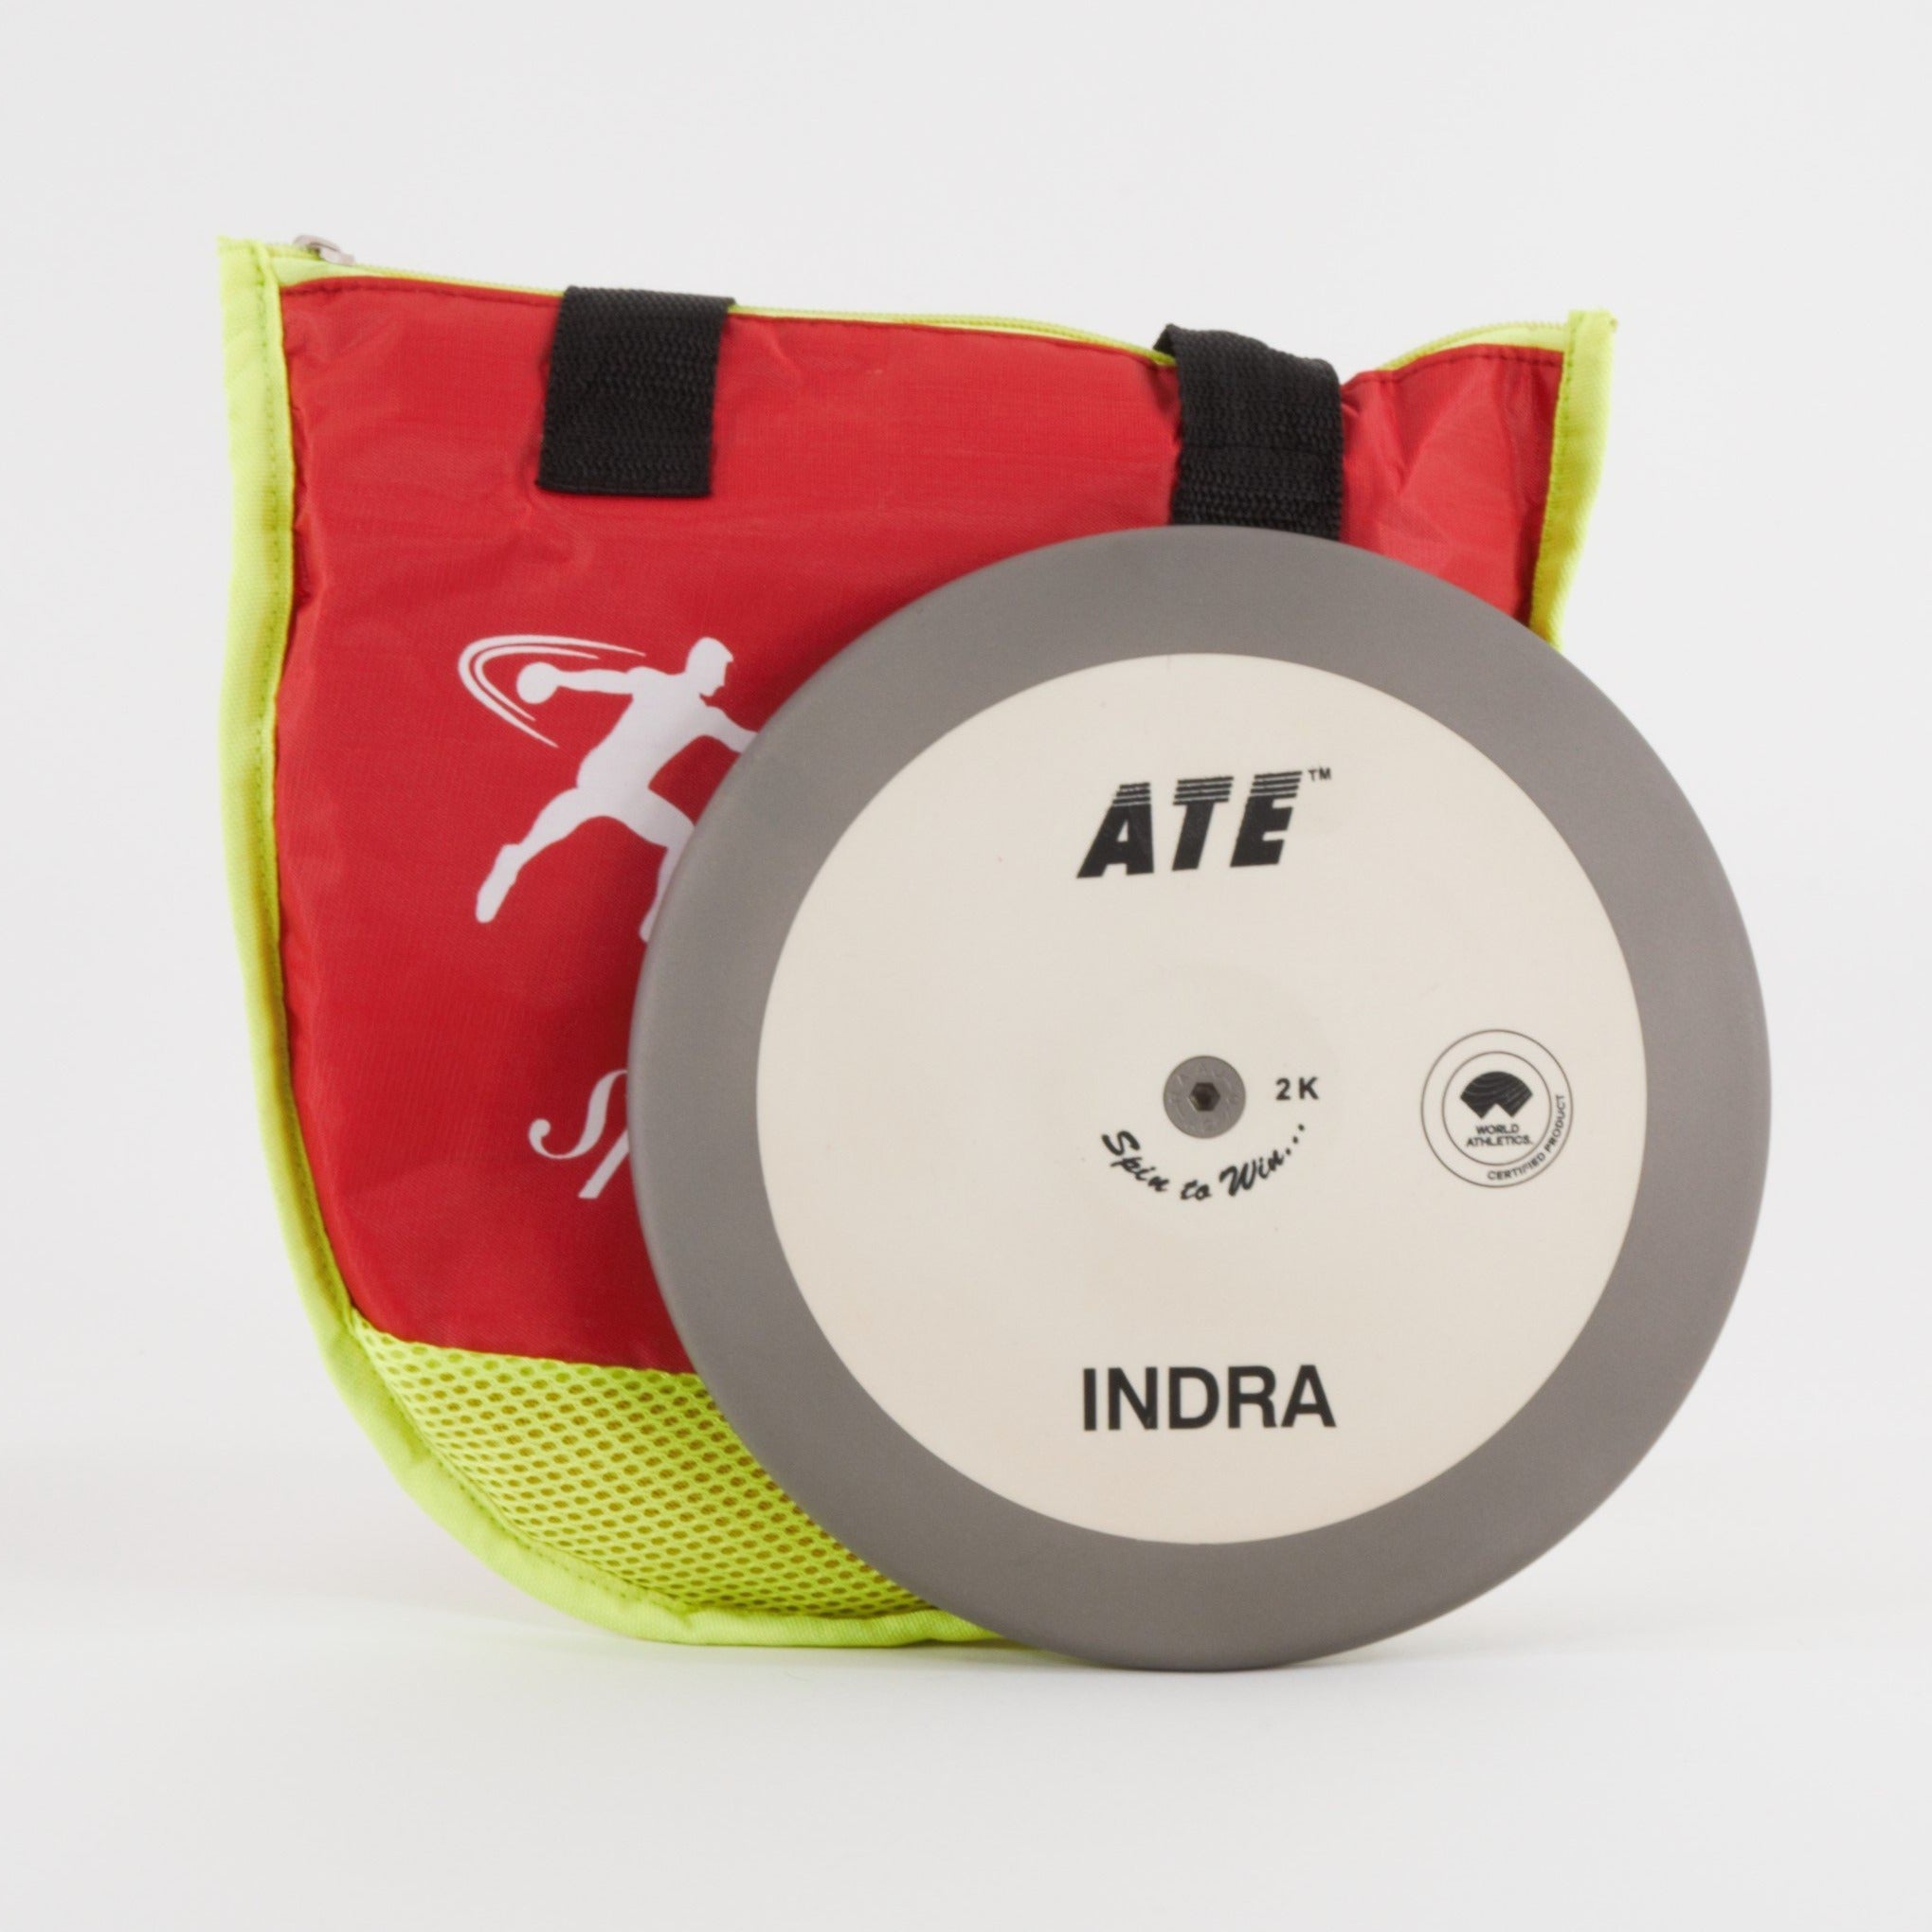 ATE Indra Discus with carry bag | Elite champion discus | Terragrip rim, World Athletics certified | Red/Yellow bag